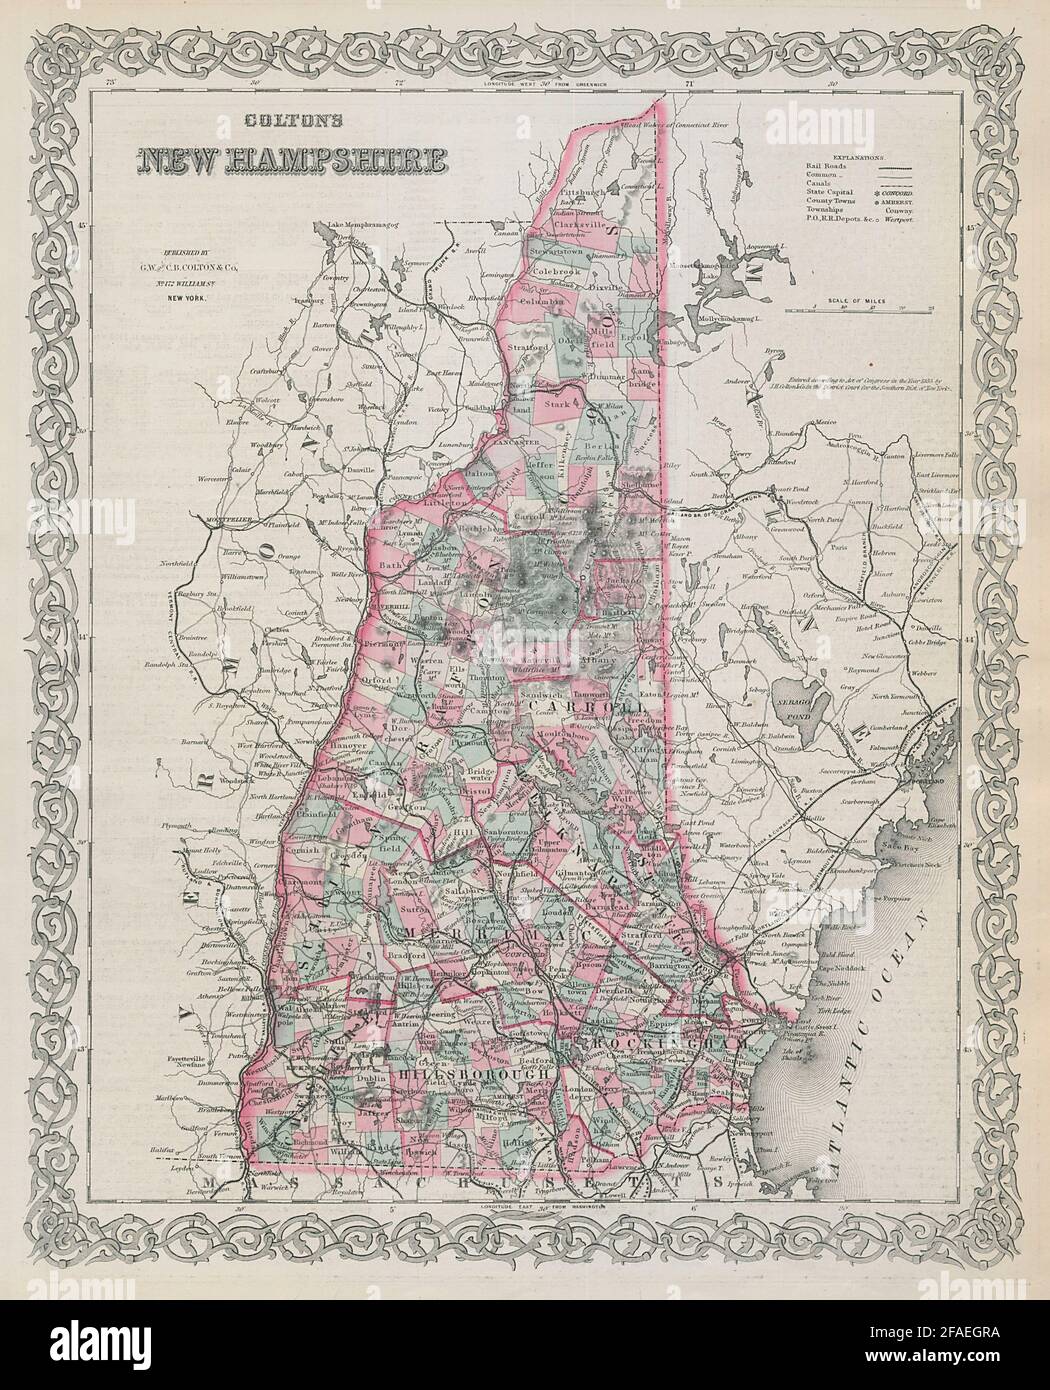 Colton's New Hampshire. Decorative antique US state map 1869 old Stock Photo